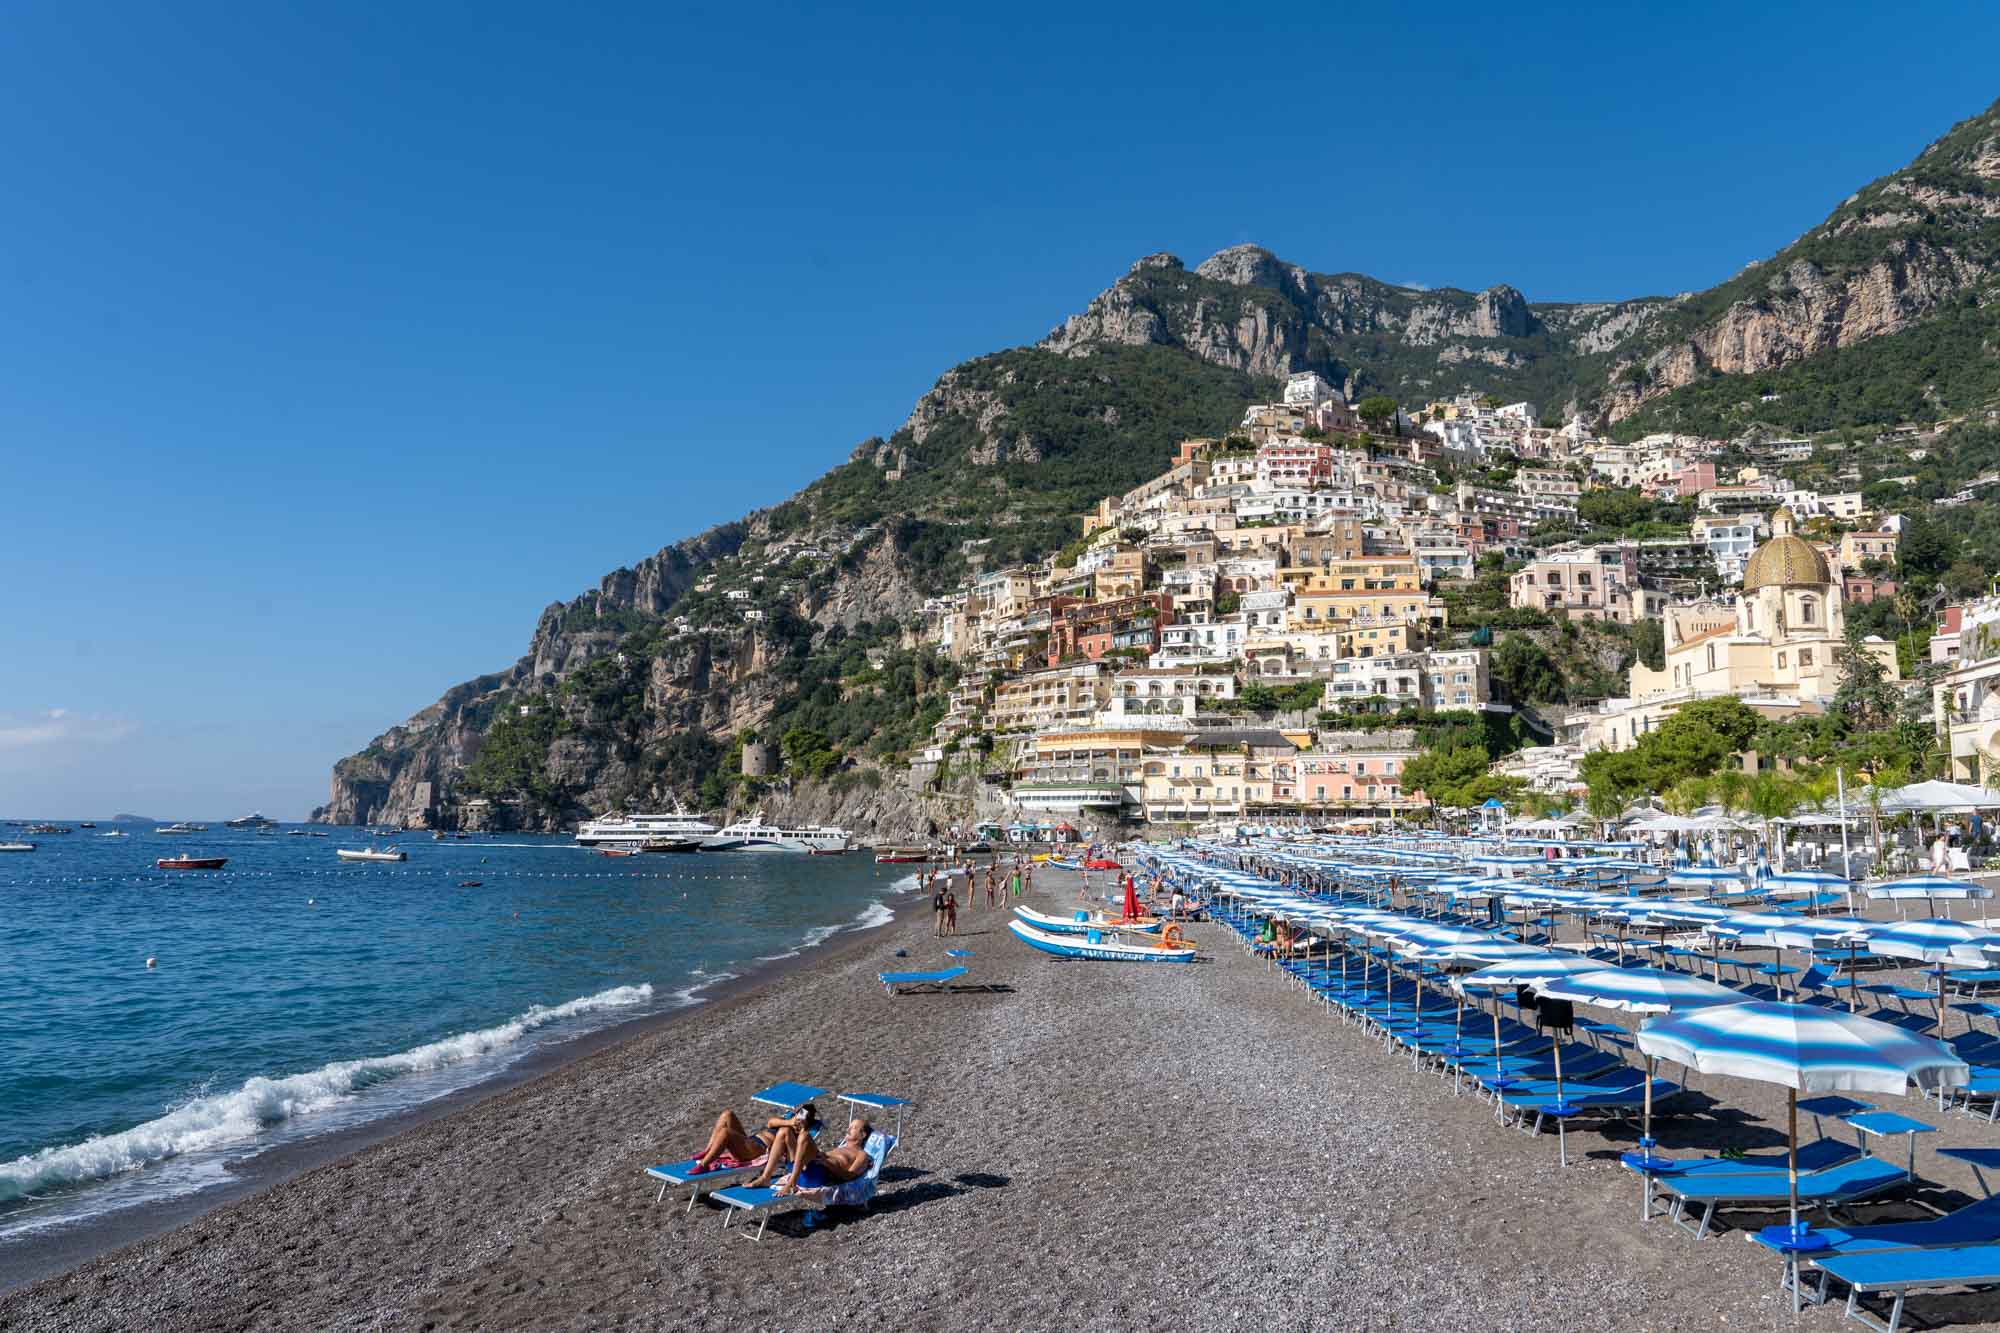 The Best Way to Take a Day Trip to the Coast from Rome